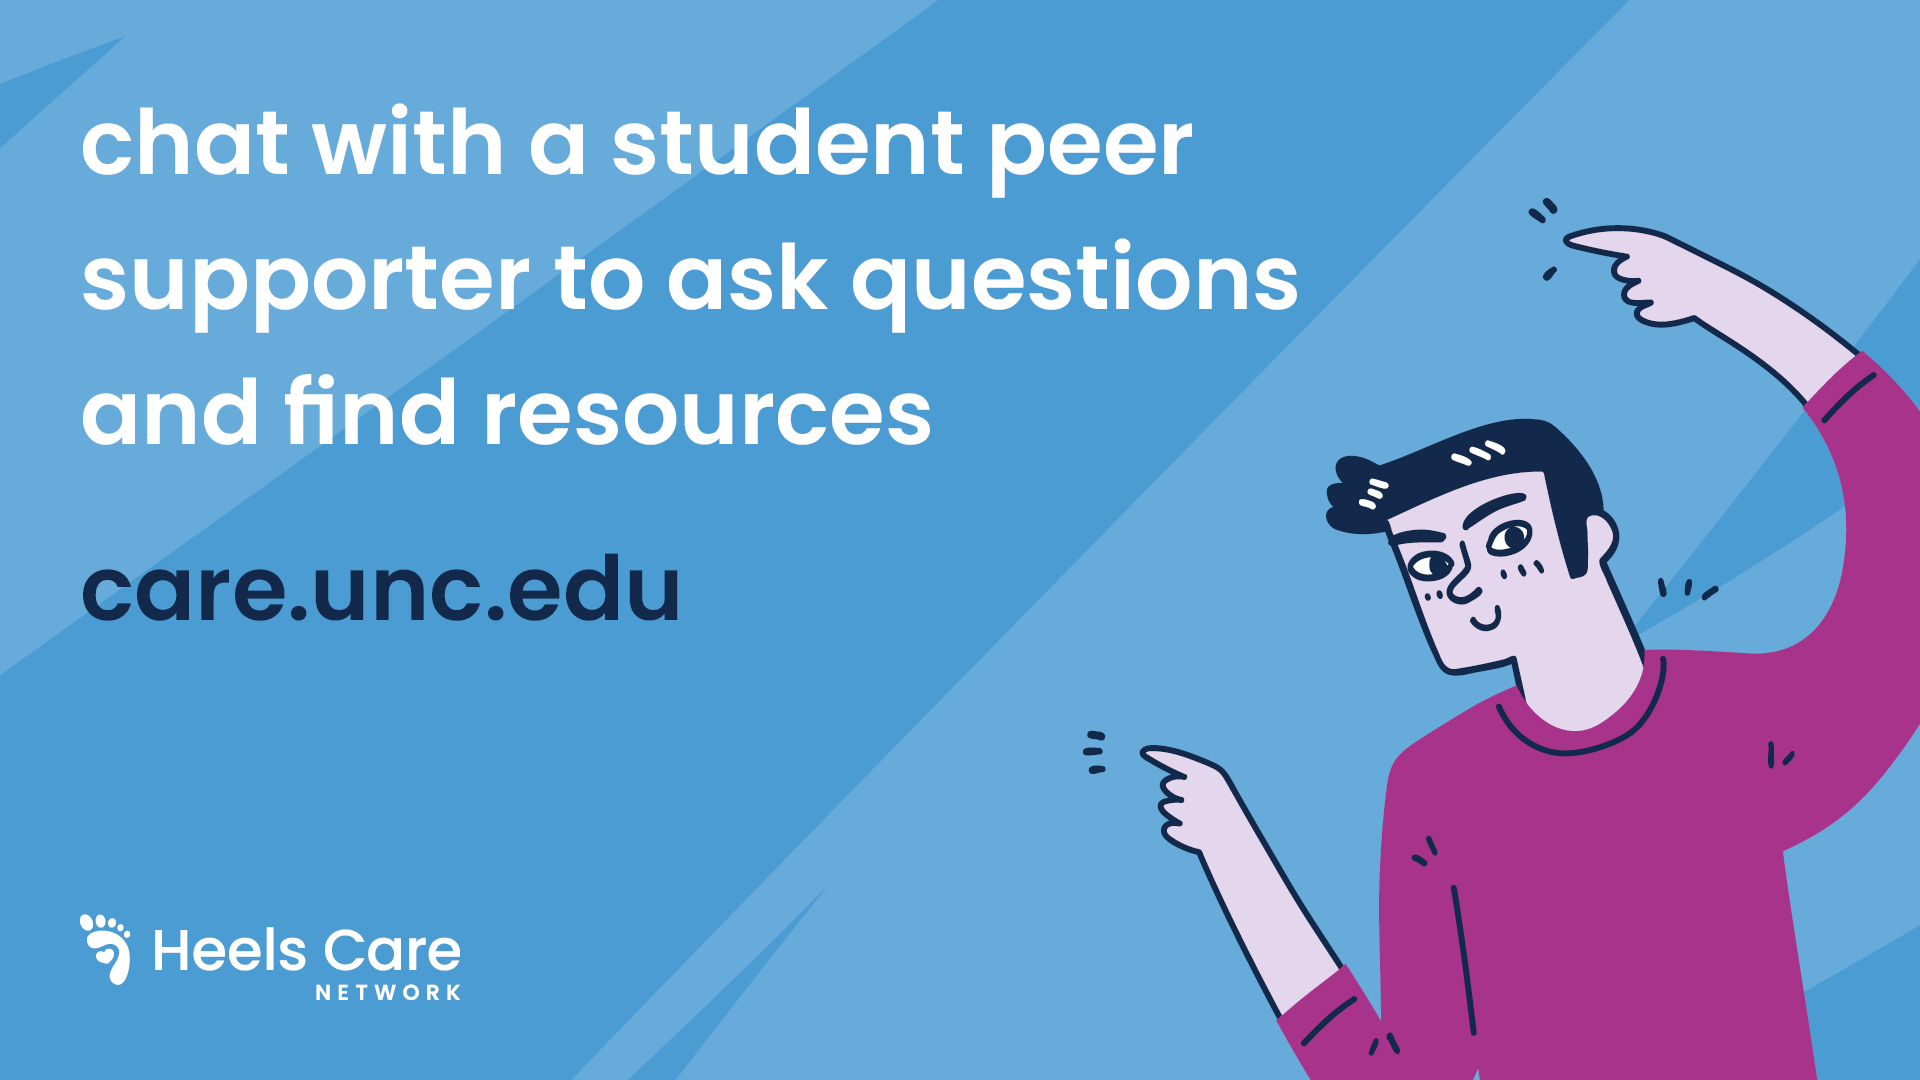 chat with a student peer supporter to ask questions and find resources